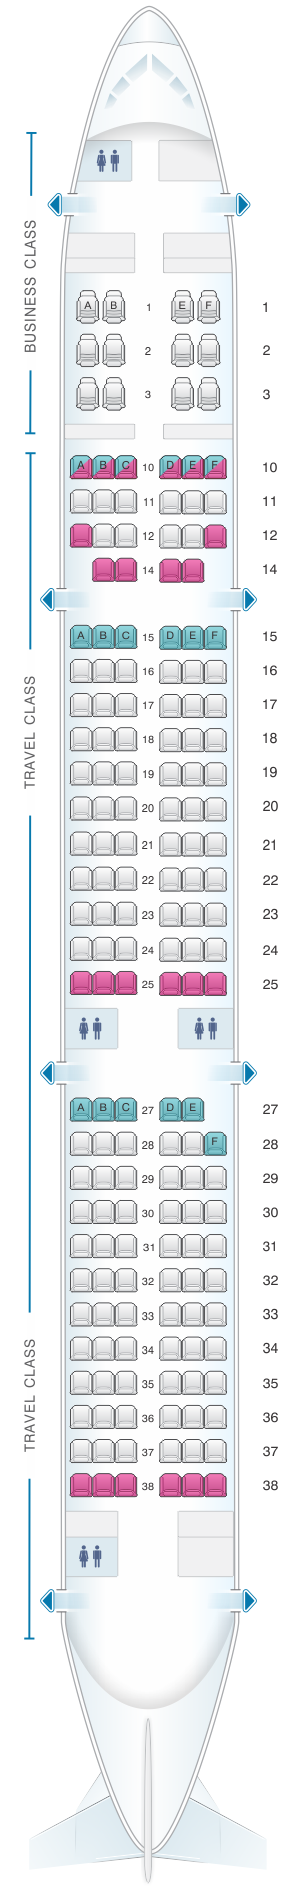 how to get seat assignment on asiana airlines